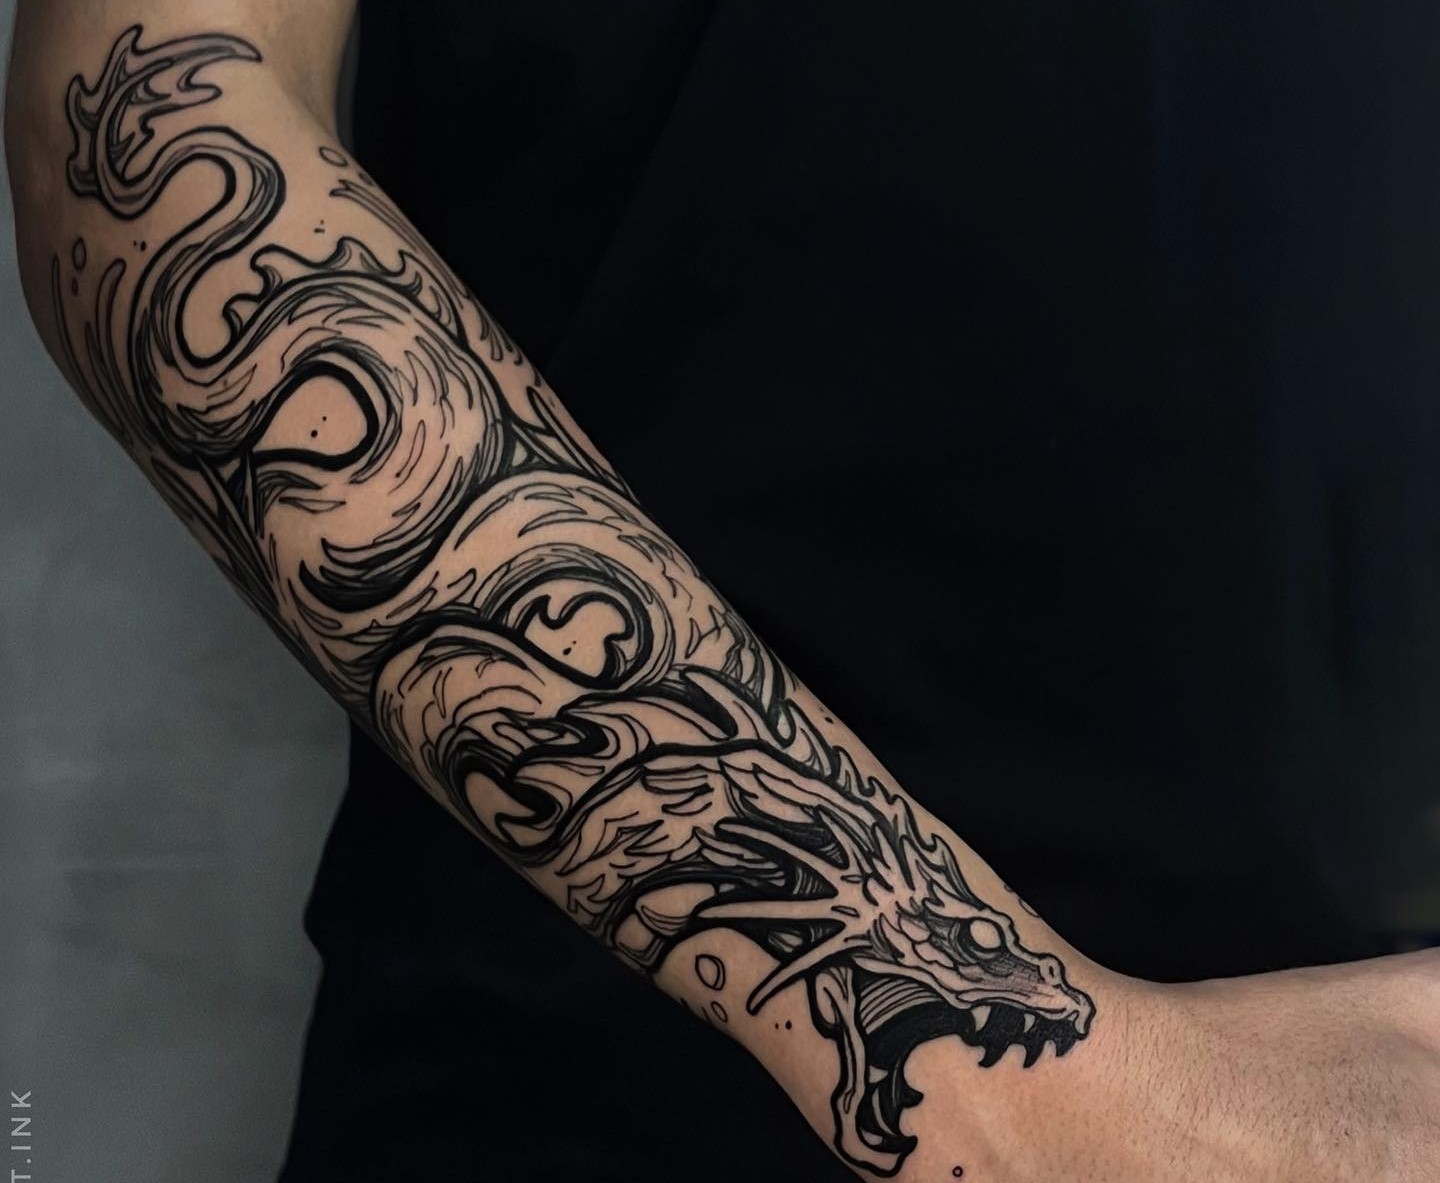 33 Amazing Dragon Forearm Tattoo Ideas To Inspire You In 2023! - Outsons